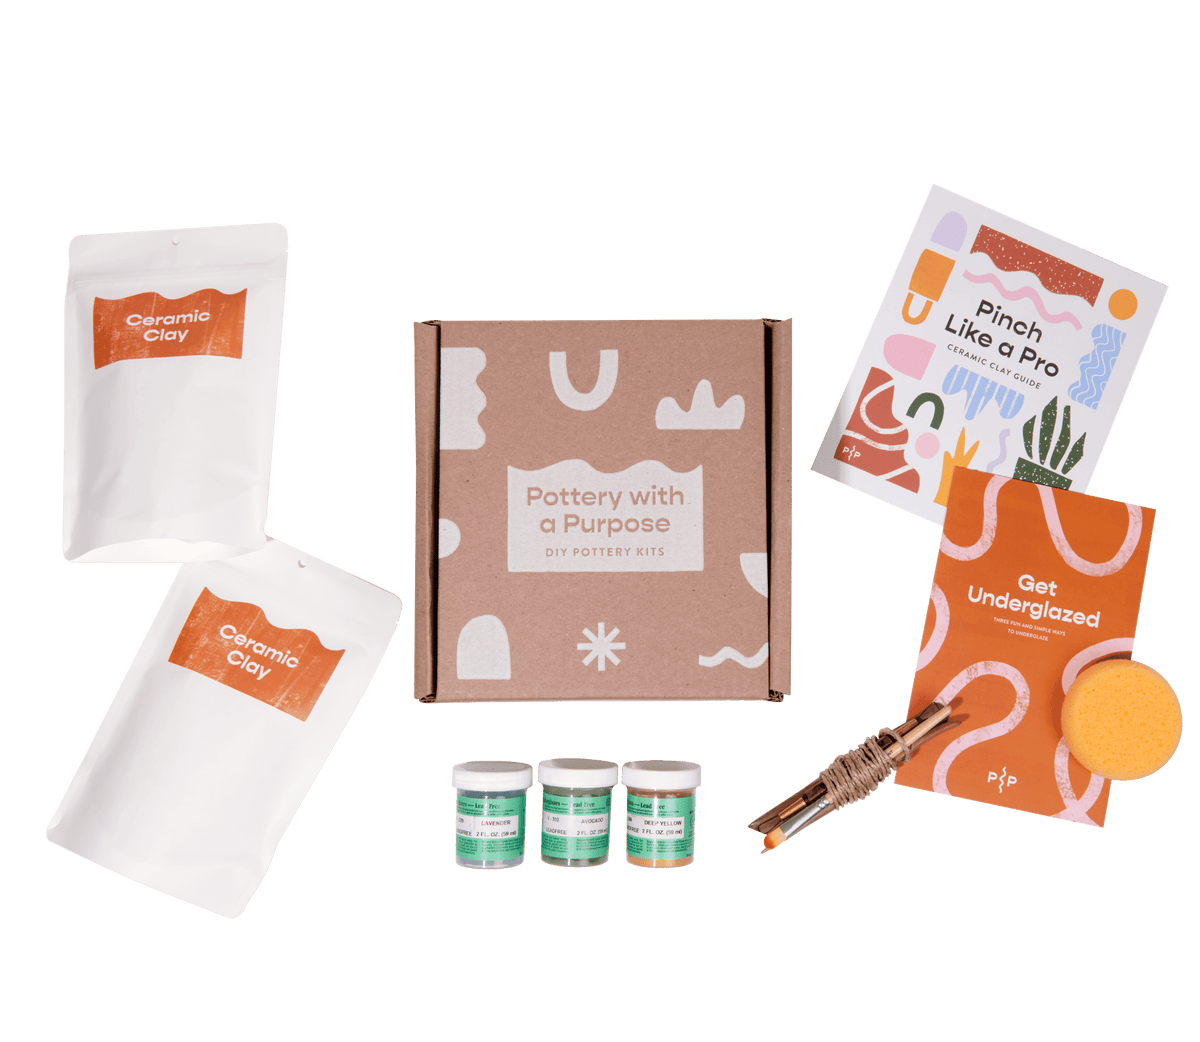 Deluxe Clay Kit – Ceramic - Pottery with a Purpose